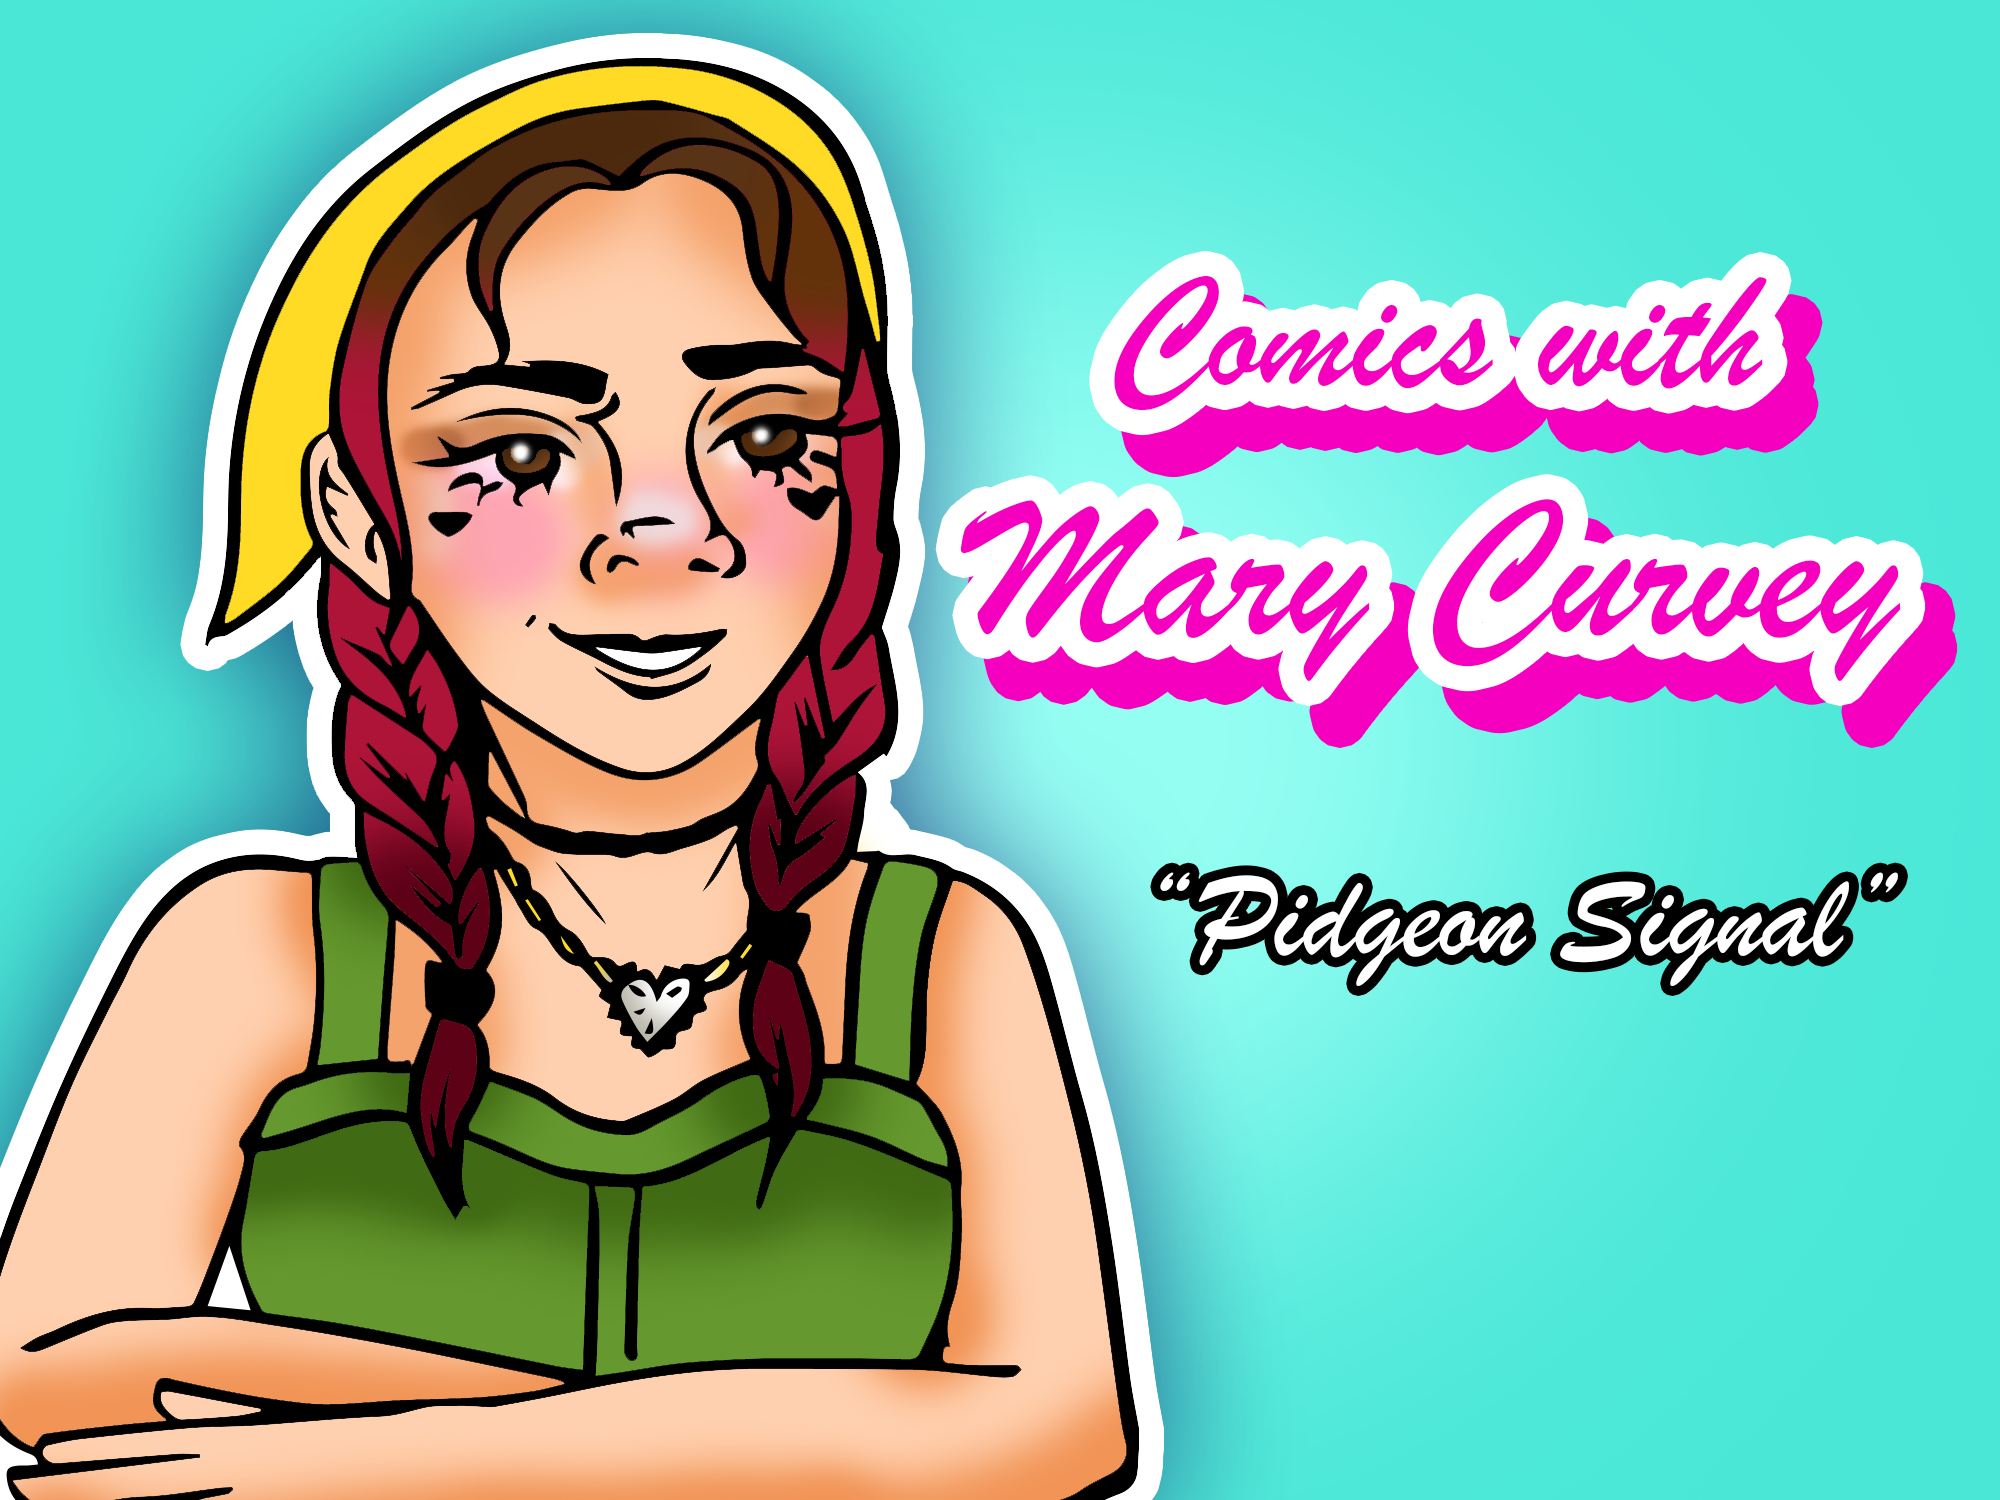 Comics with Mary Curvey Title